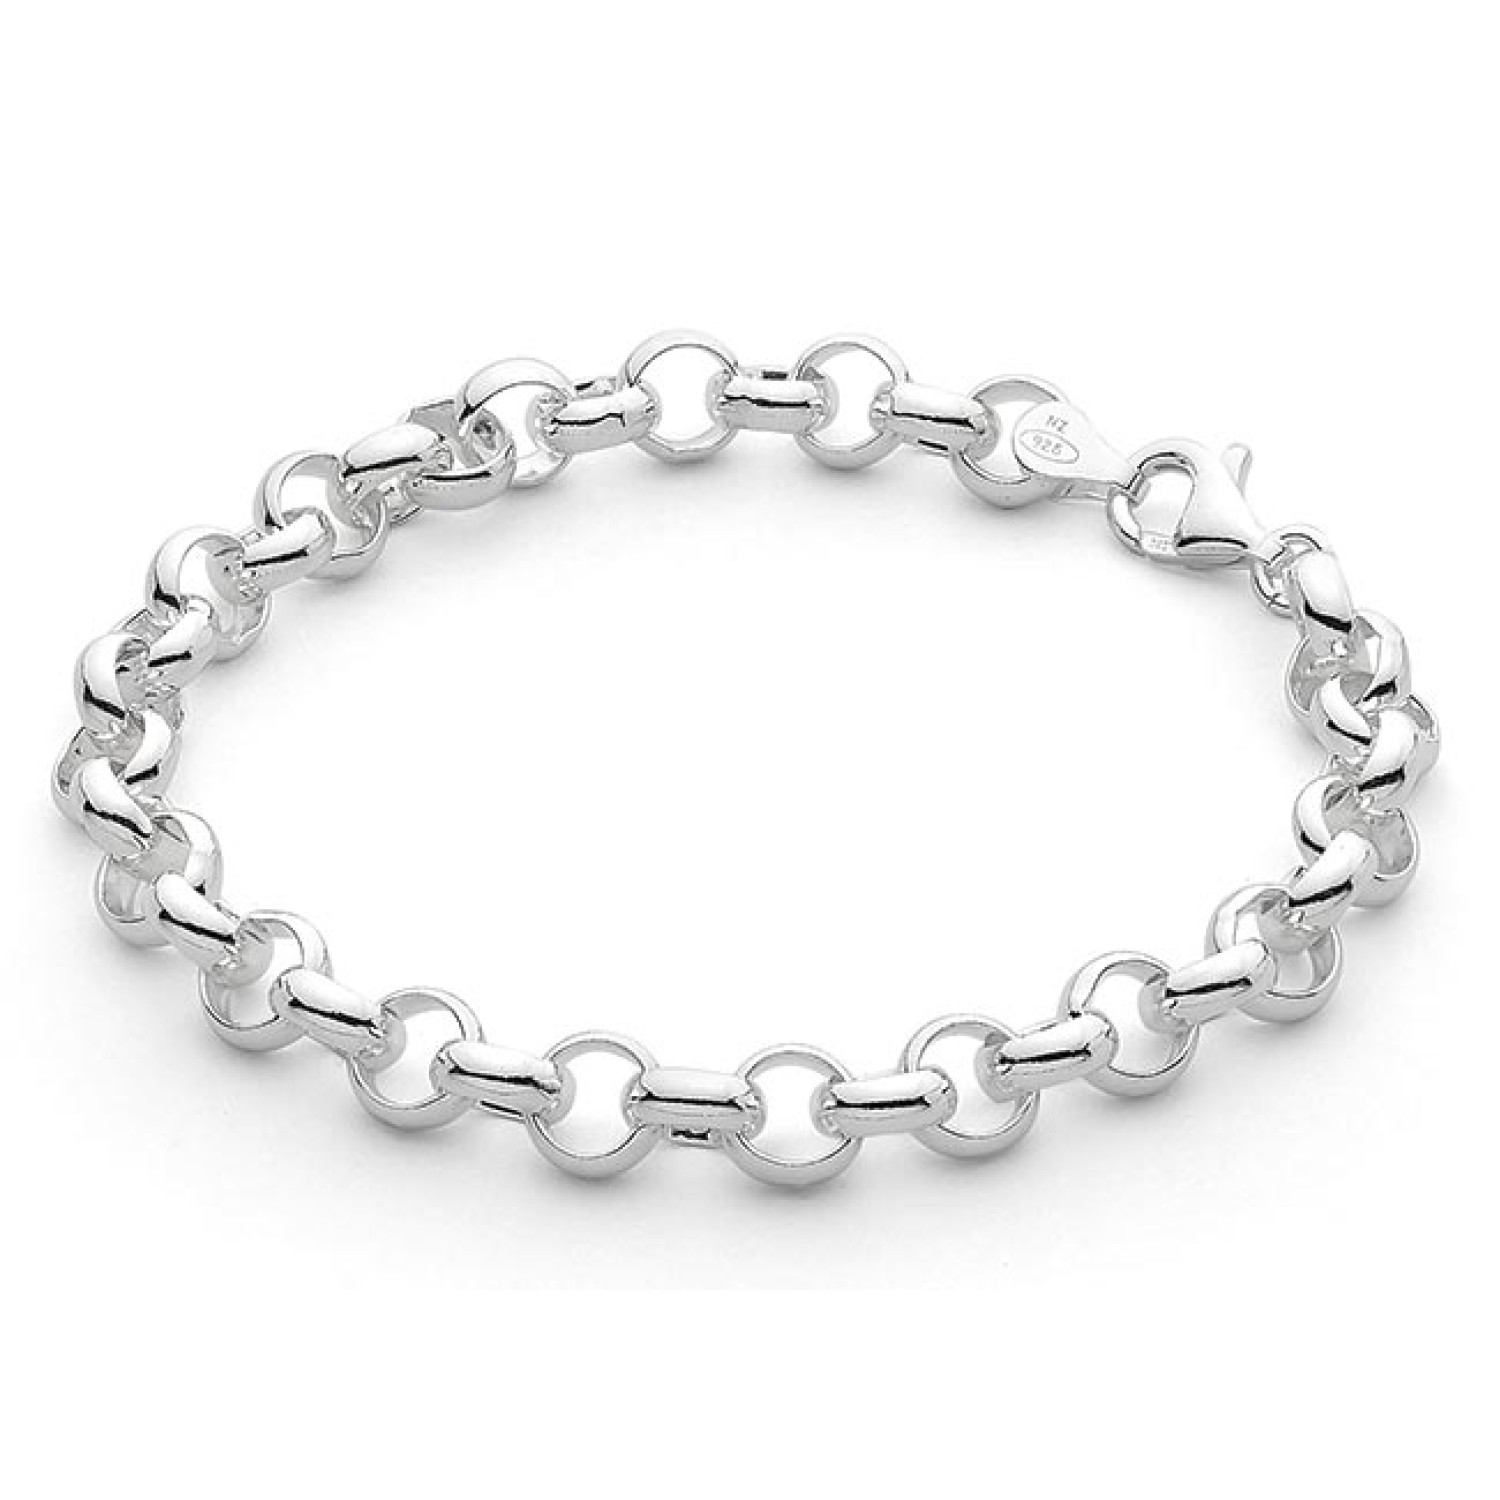 Sterling Silver Belcher Bracelet. A 925 Sterling Silver Belcher Bracelet Sterling Silver 19cm in Length Christies exclusive 5 year guarantee Gift wrapped on request Humm -Buy Little things up to $1000 and choose 10 weekly or 5 f @christies.online